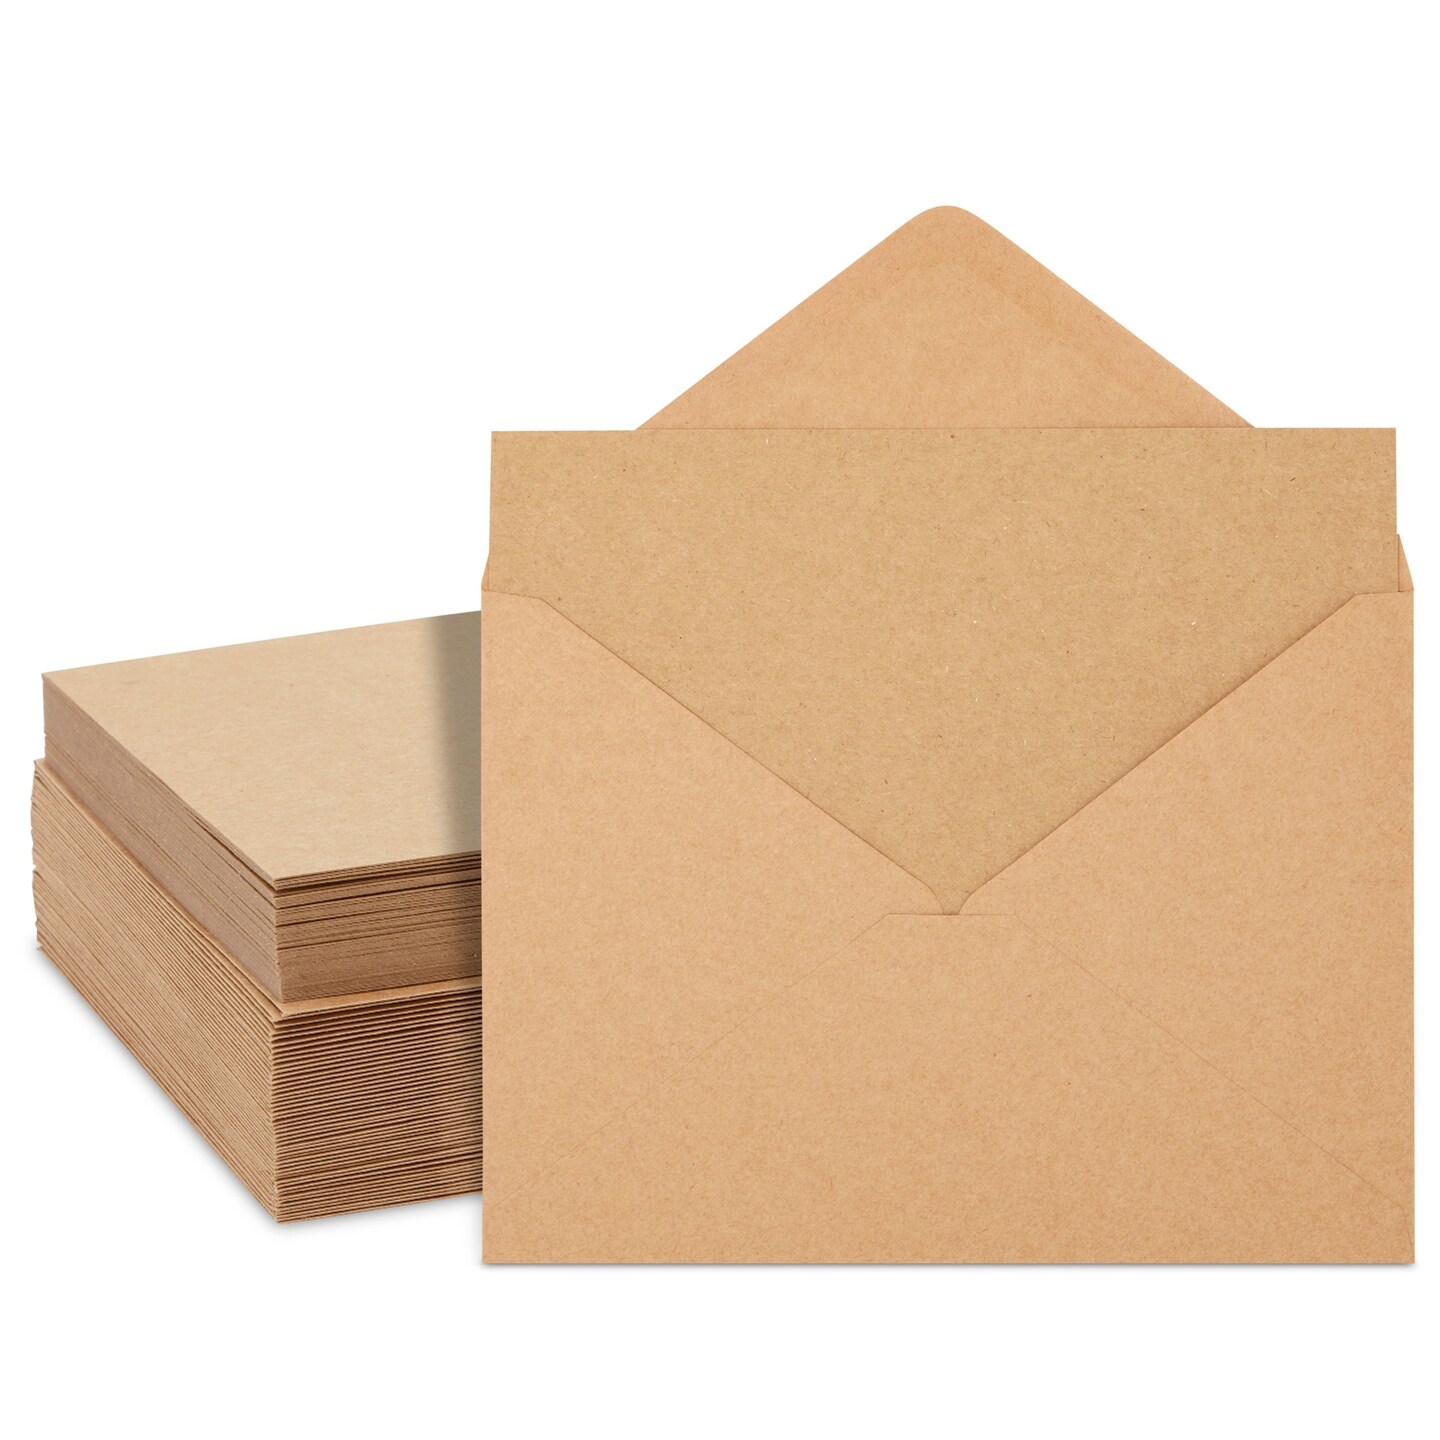 Blank Cards and Envelopes